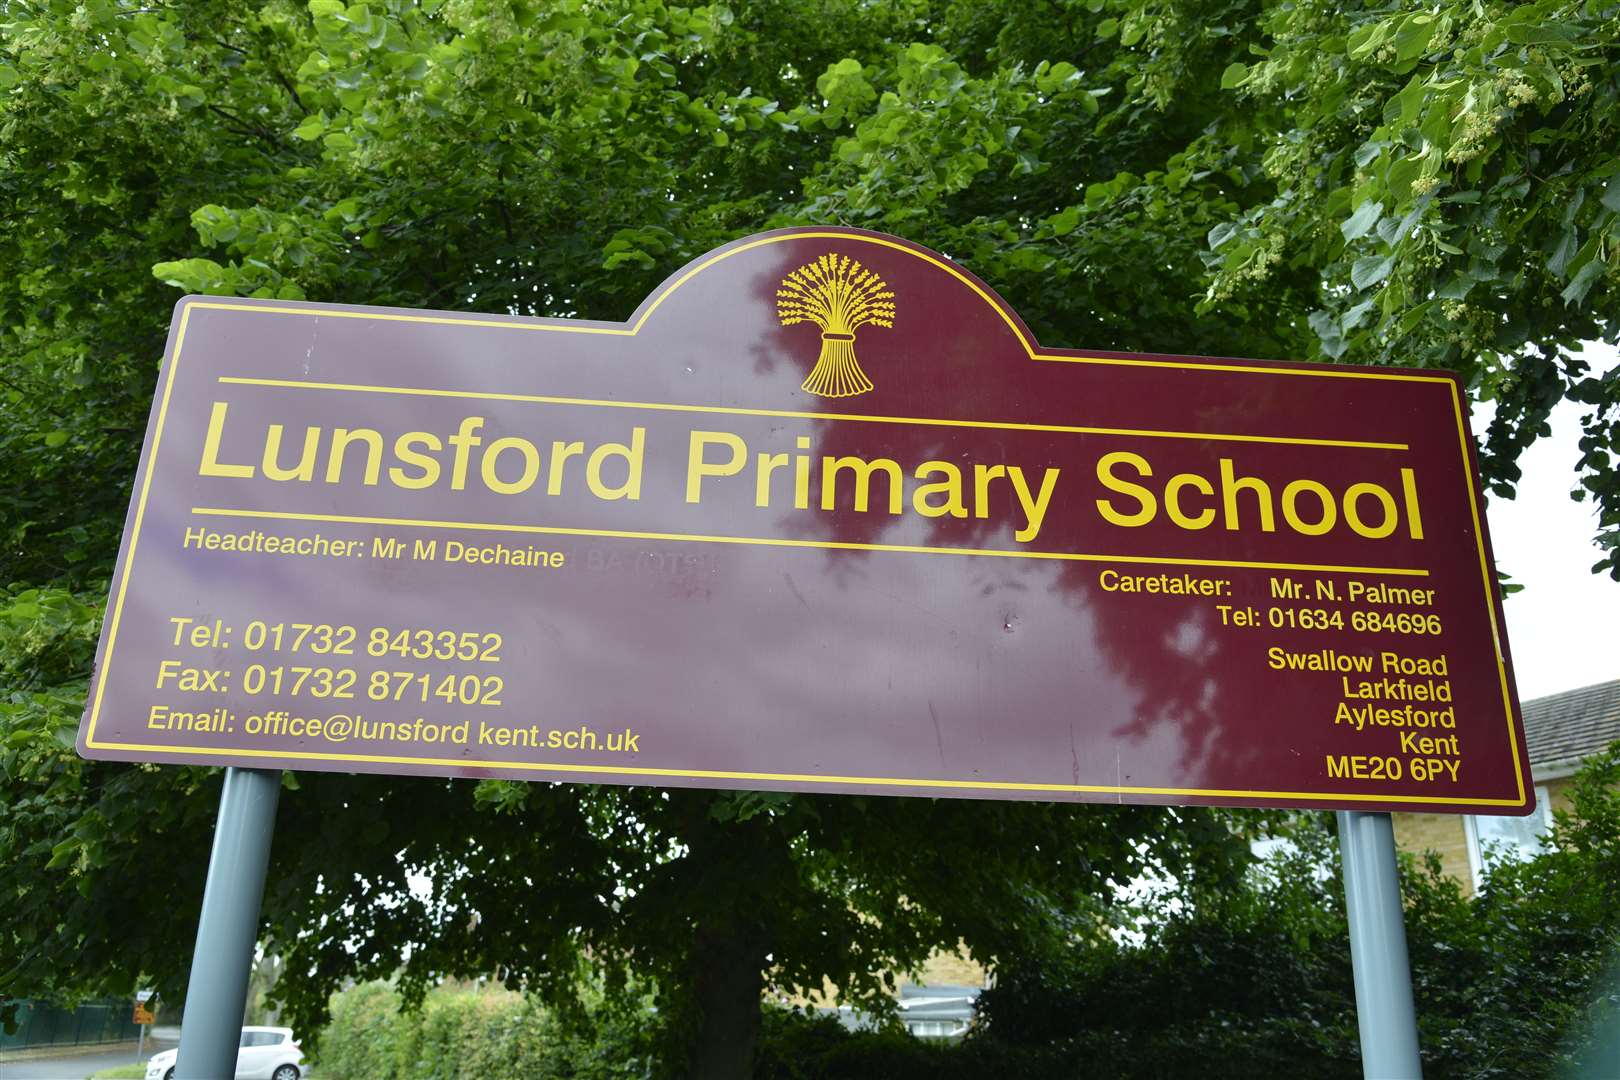 Lunsford Primary School in Swallow Road